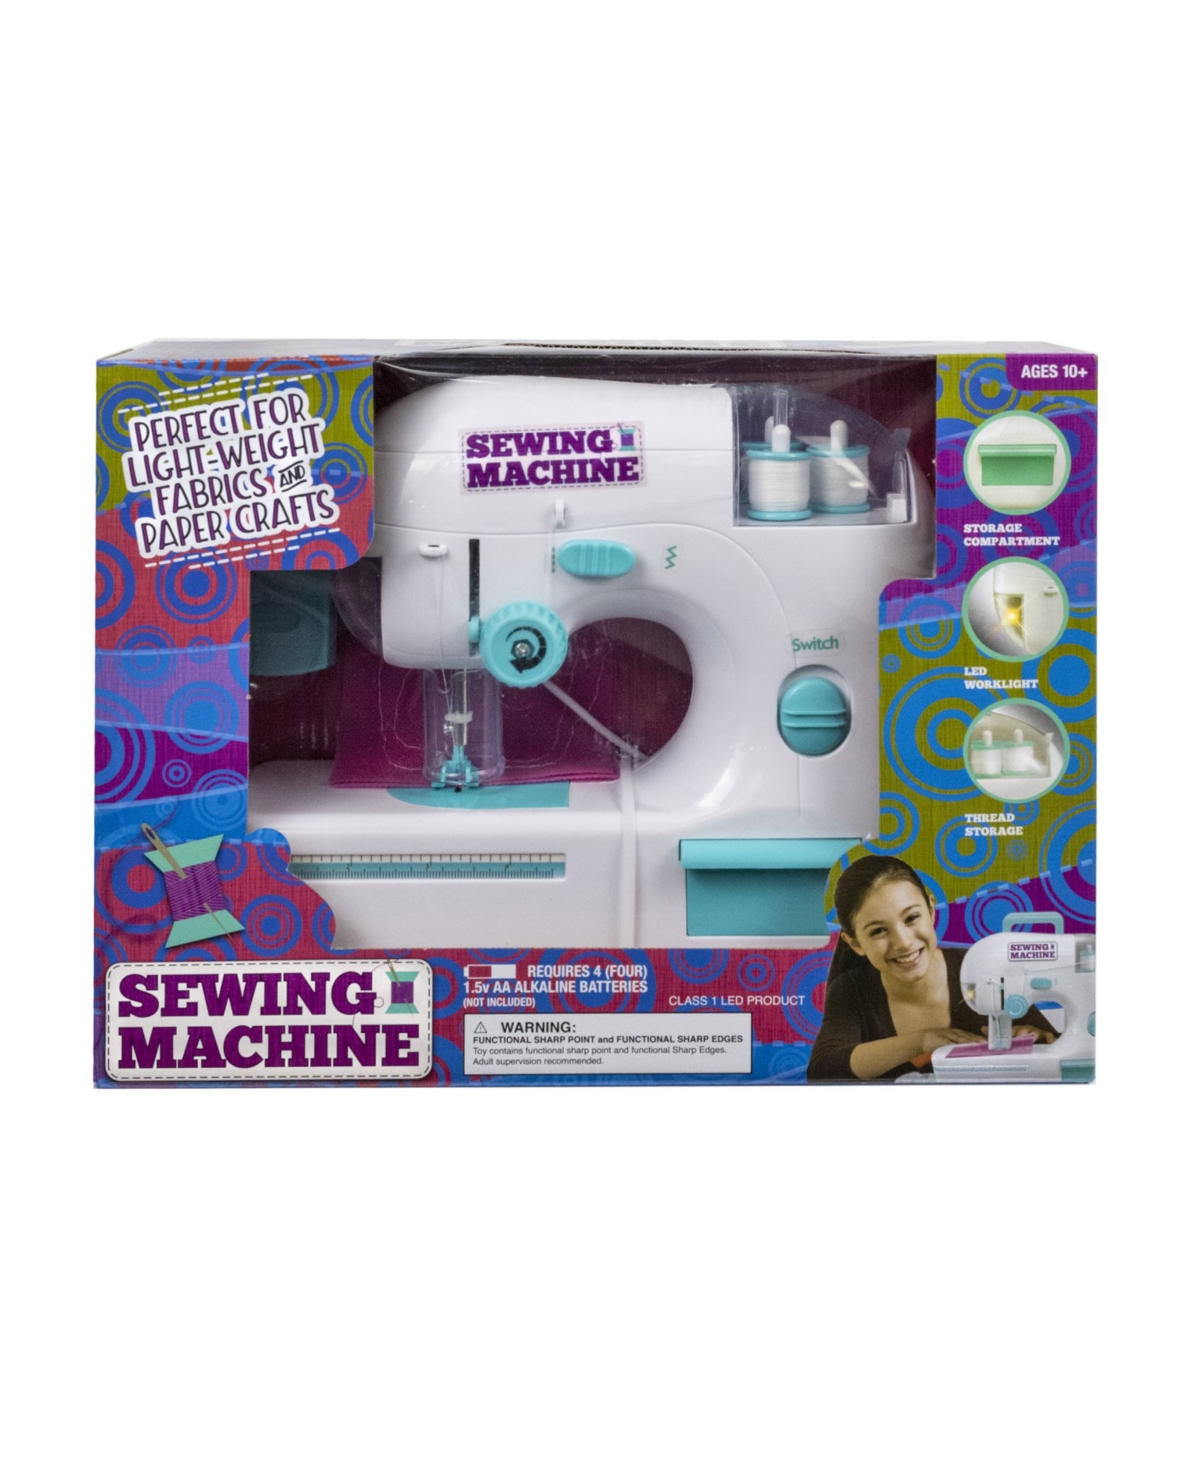 Bernette b05 Crafter Sewing Machine With $199 Bundle